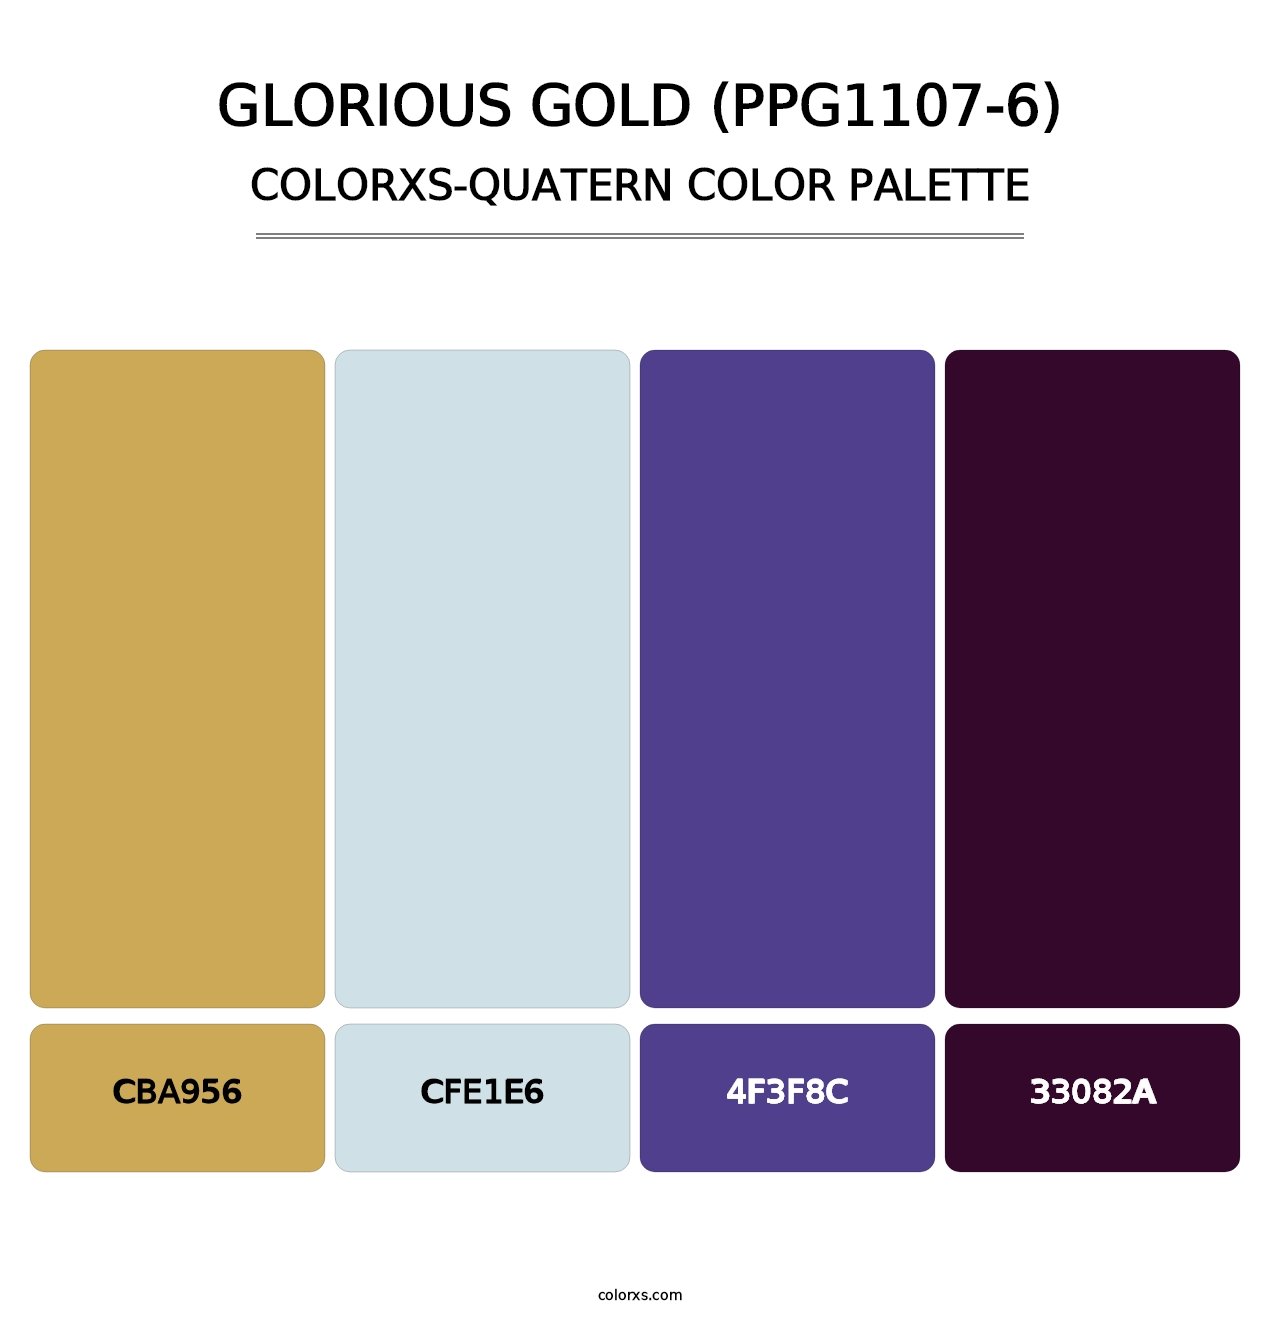 Glorious Gold (PPG1107-6) - Colorxs Quatern Palette